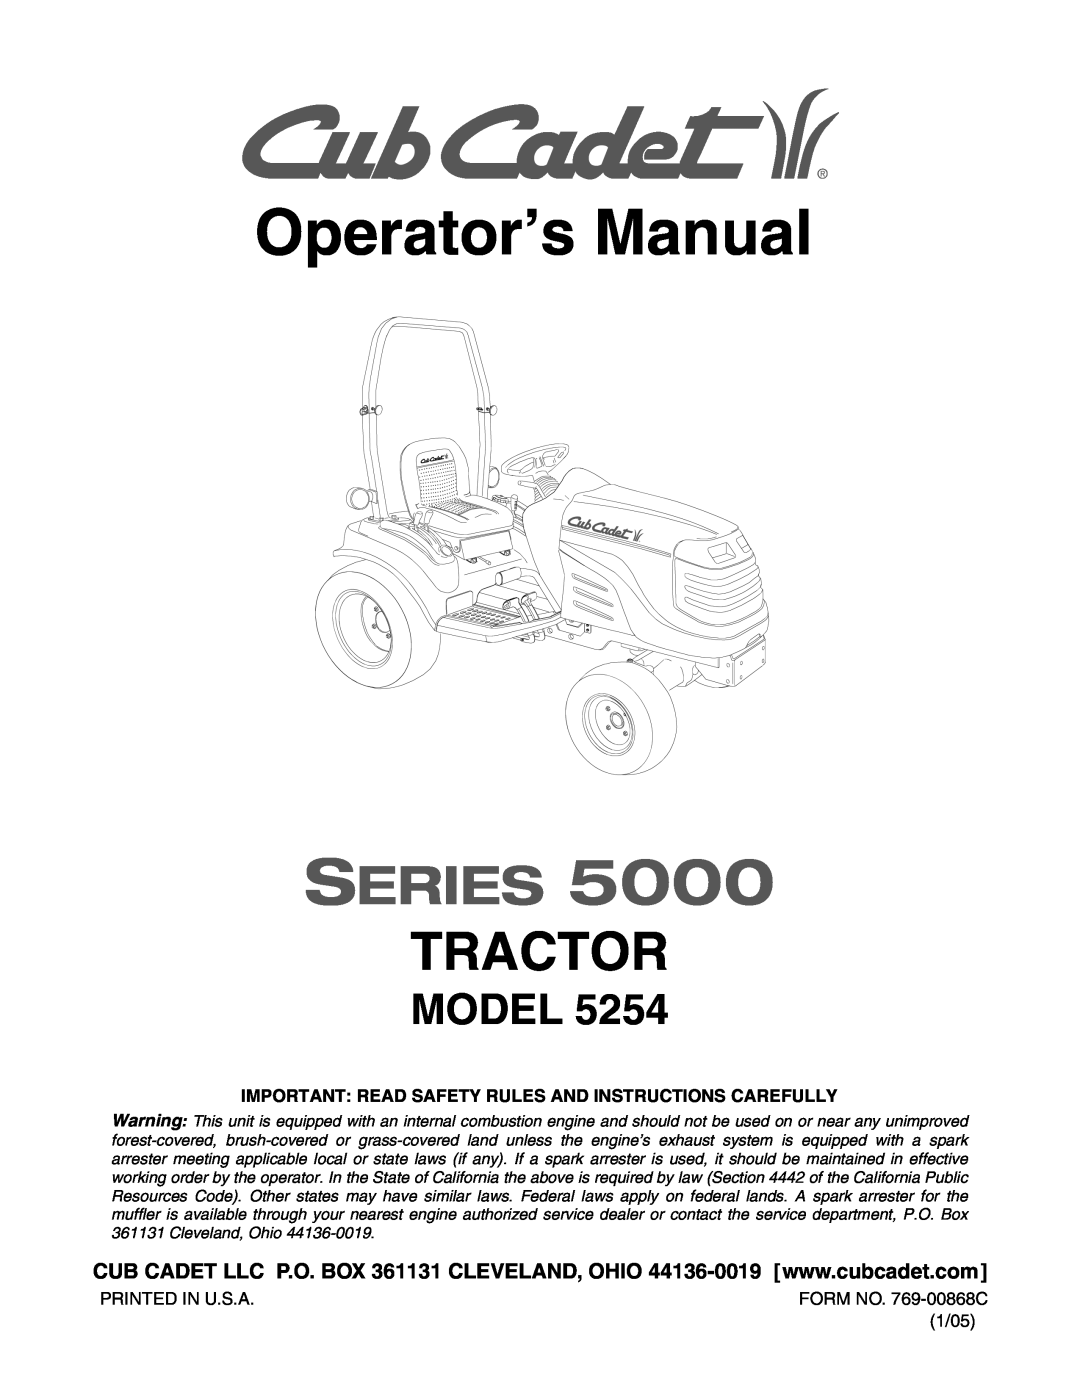 Cub Cadet 5254 manual Important Read Safety Rules And Instructions Carefully, Operator’s Manual, Series, Tractor, Model 